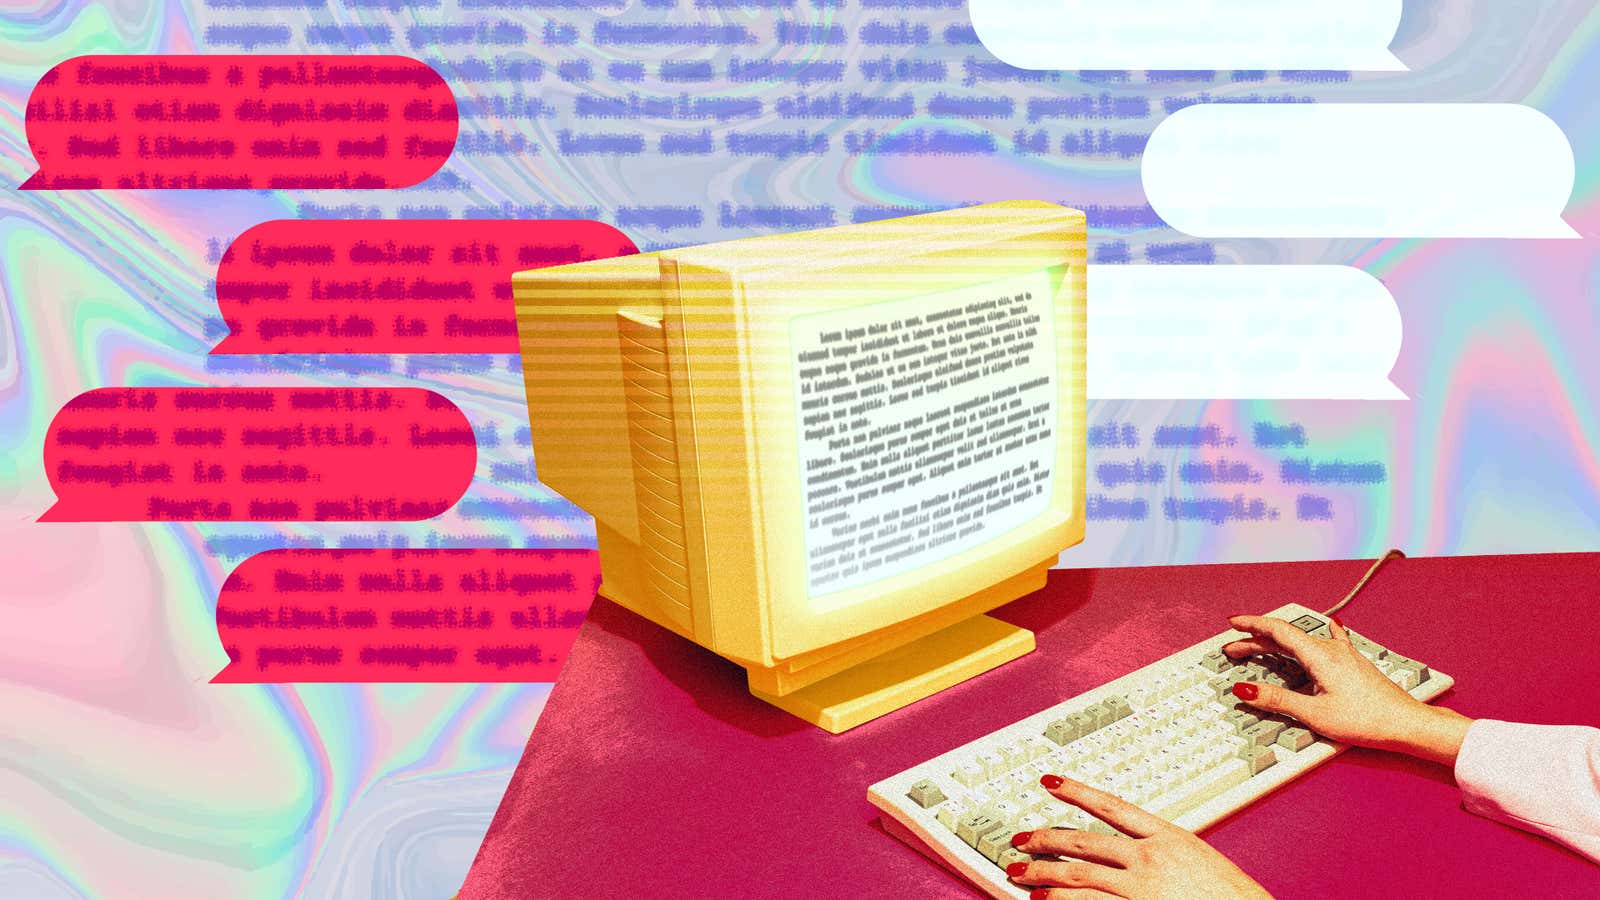 Chatbots Have Stolen Fanfiction From a Gift Culture